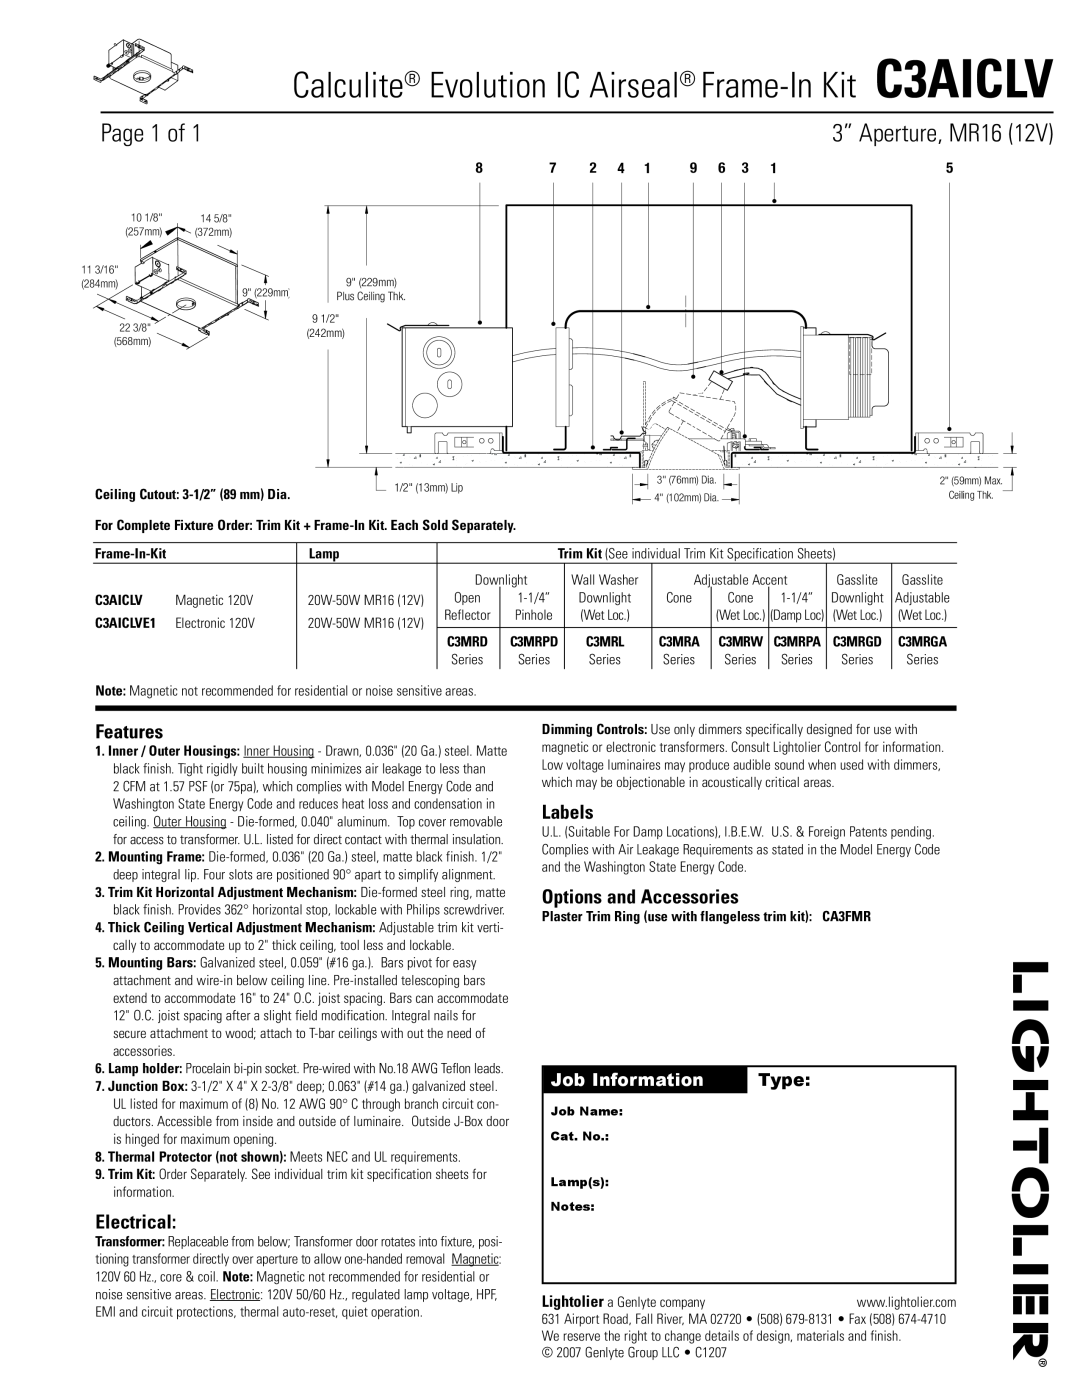 Lightolier C3AICLV specifications Page, 3” Aperture, MR16, Features, Electrical, Labels, Options and Accessories, Type 